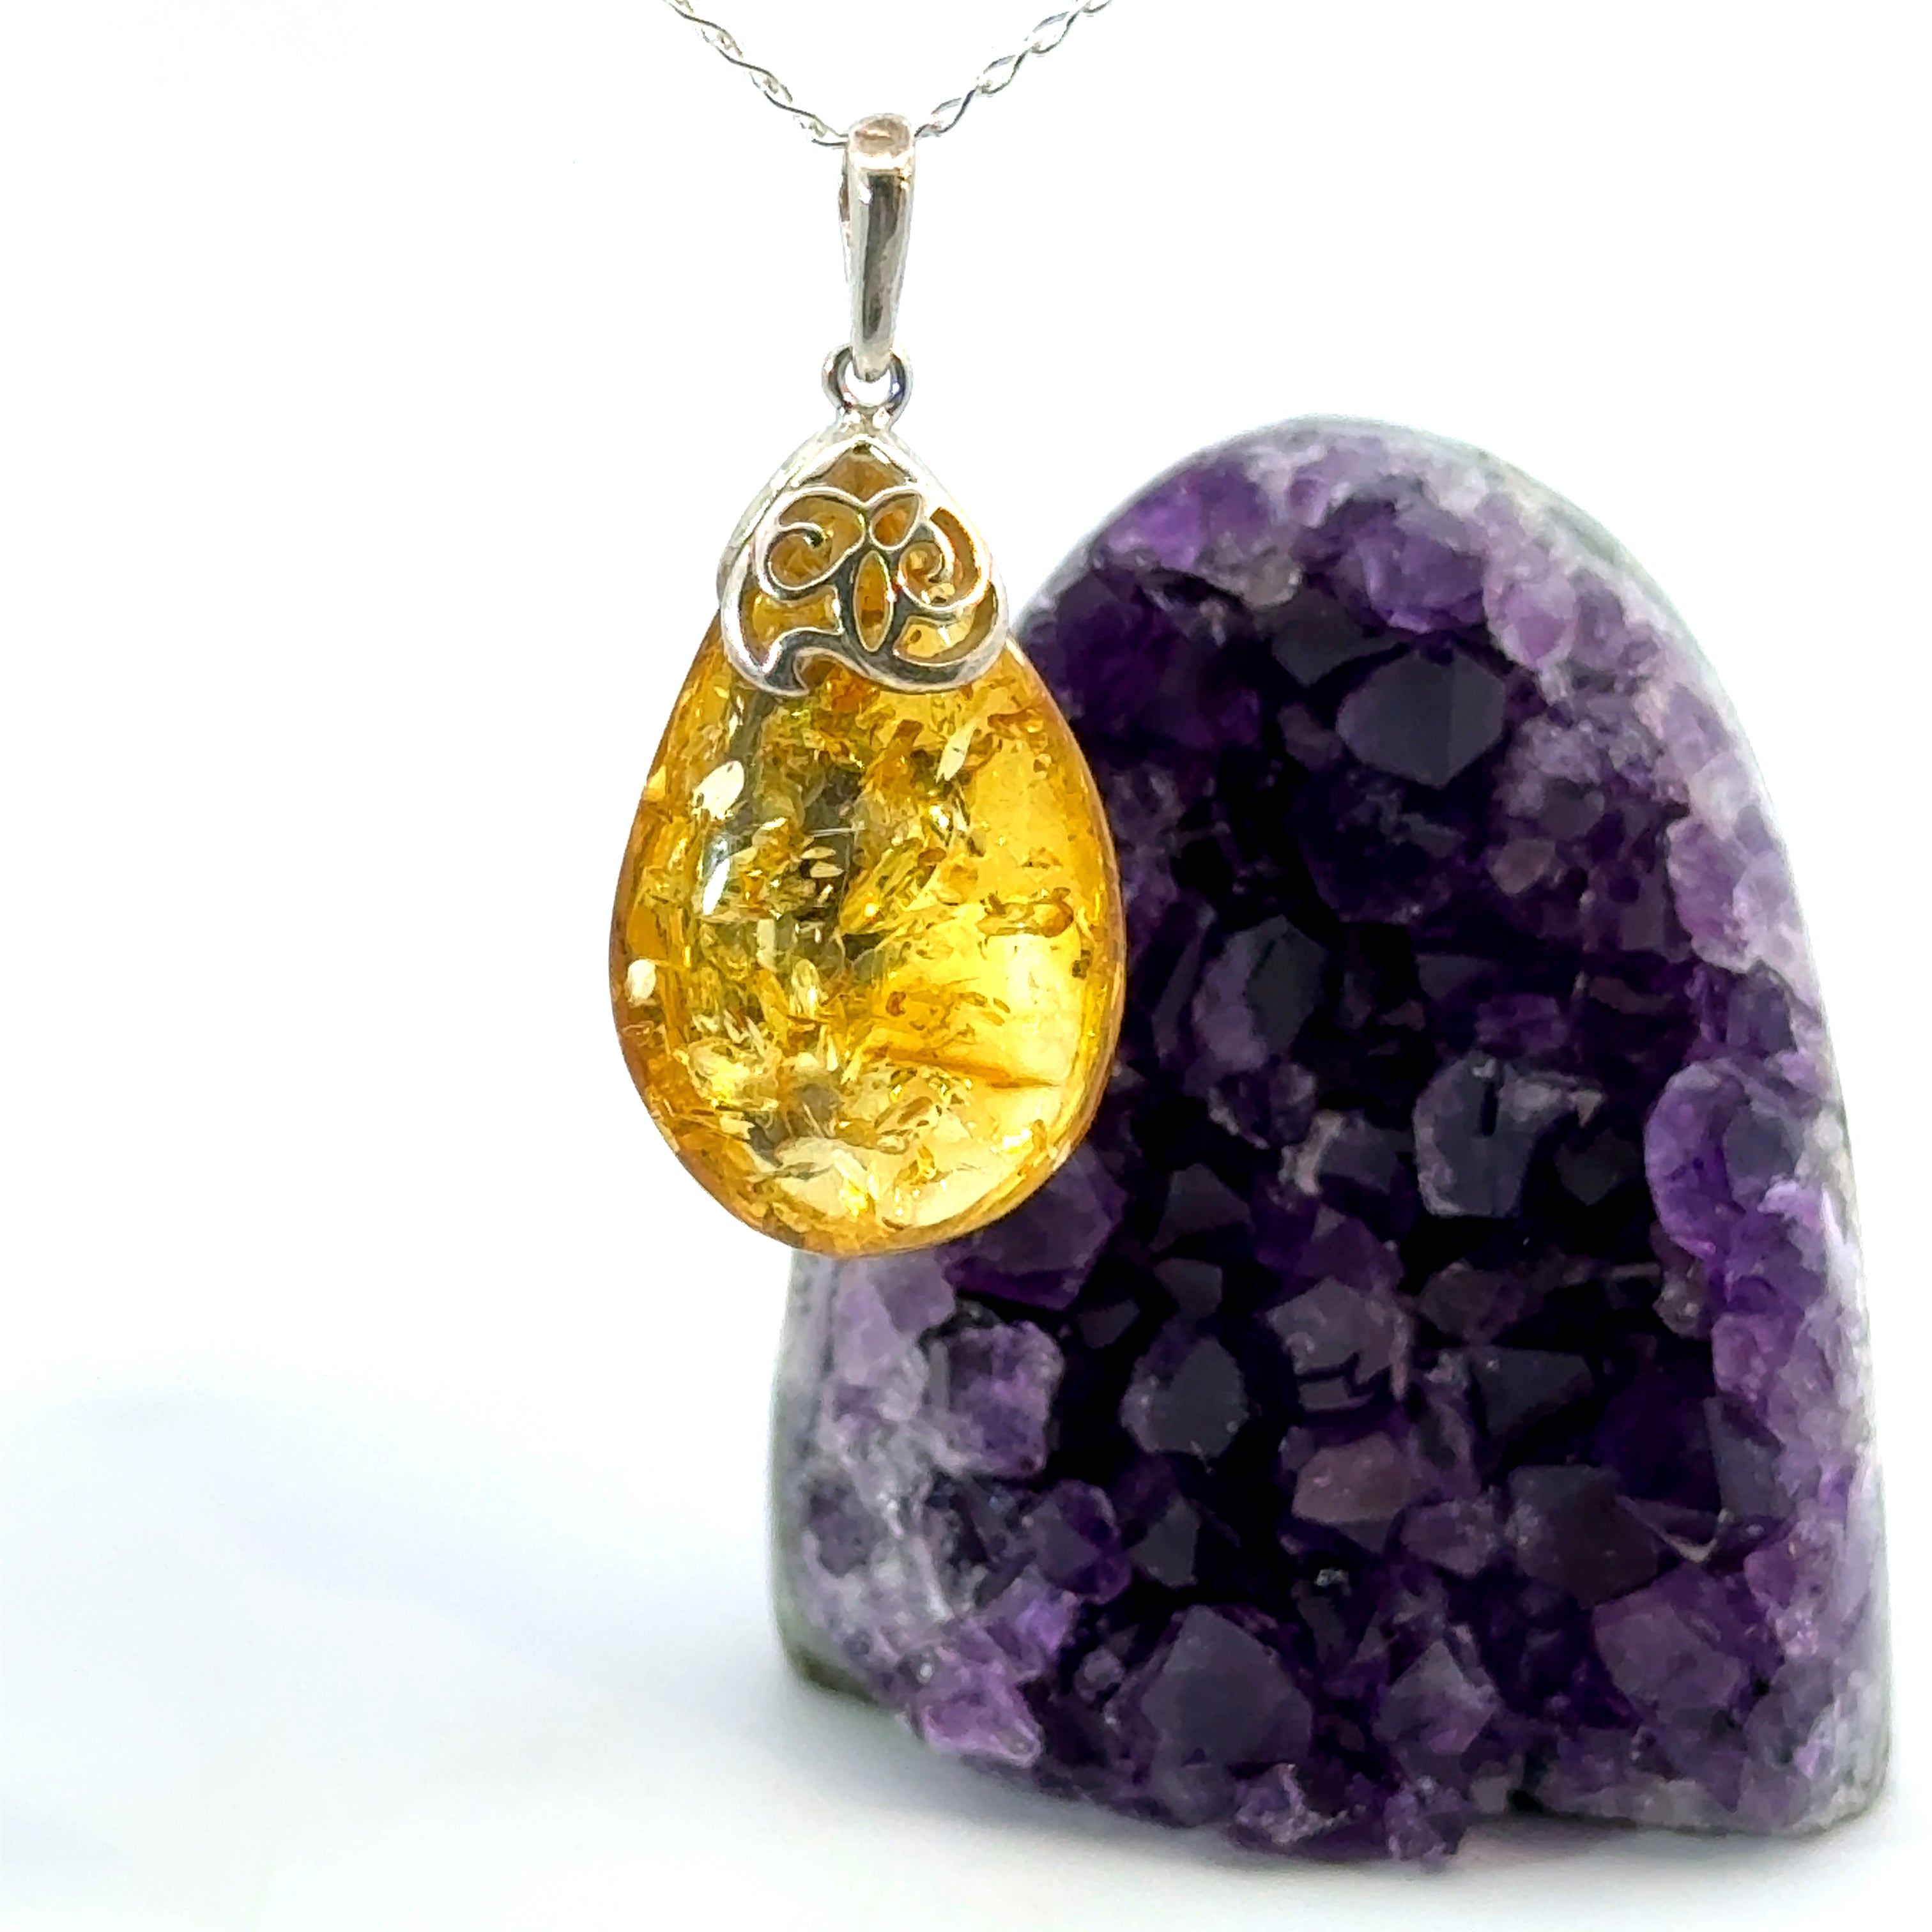 Pear Cut Amber Necklace in Sterling Silver